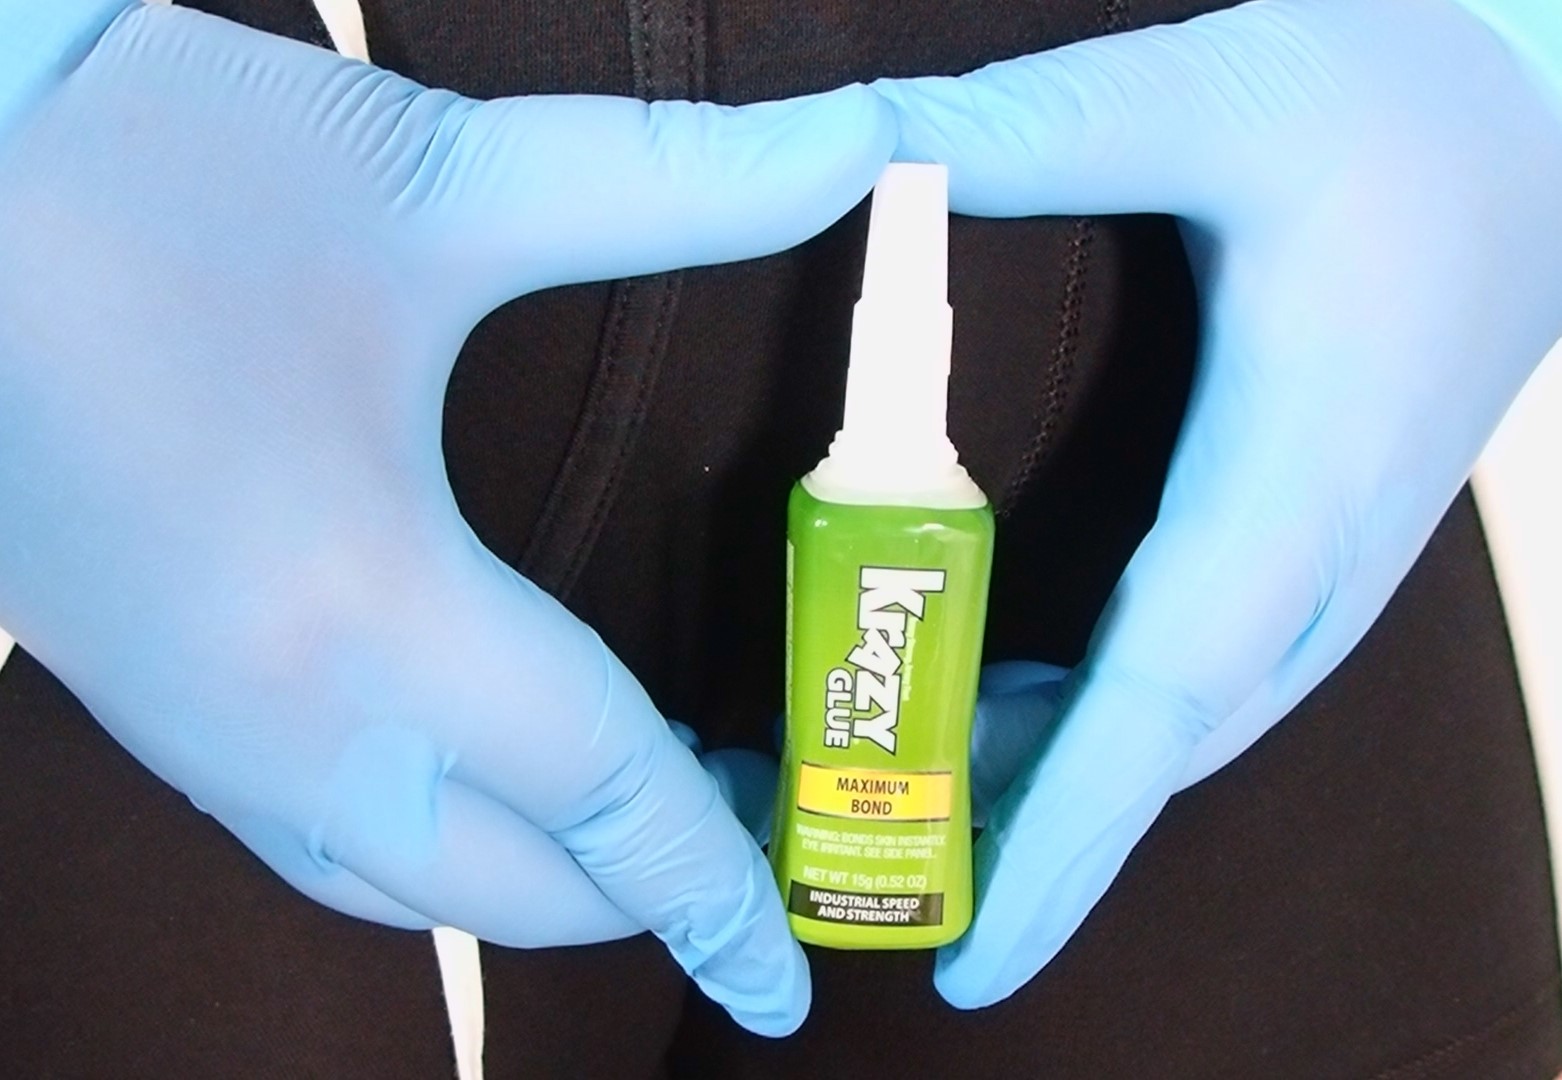 I'm wearing boxer briefs, a lab coat, and blue exam gloves while holding krazy glue